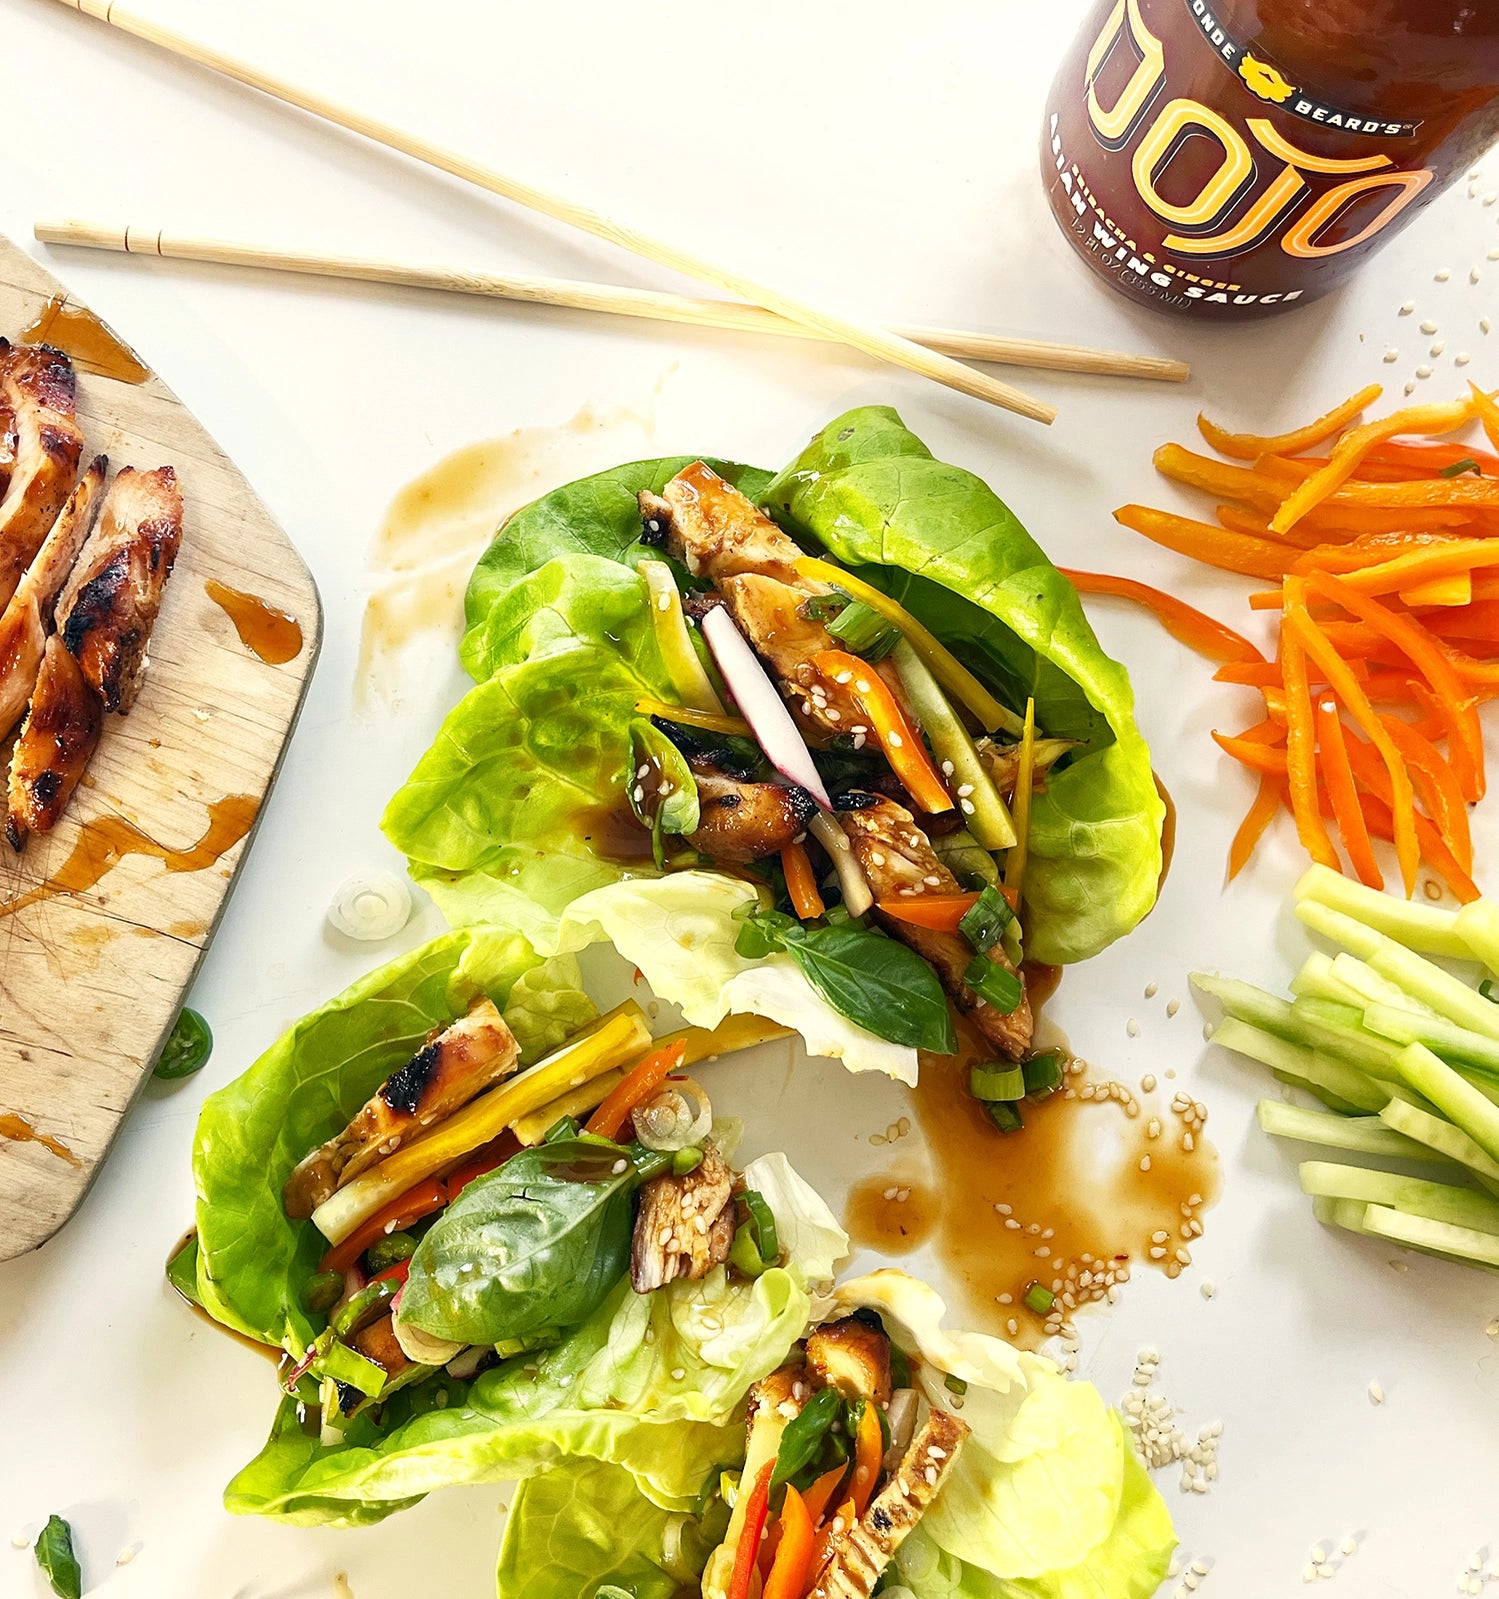 One (1) bottle of Dojo Asian Wing Sauce adds flavors of sriracha, ginger, sesame and soy sauce to liven up lettuce wraps.